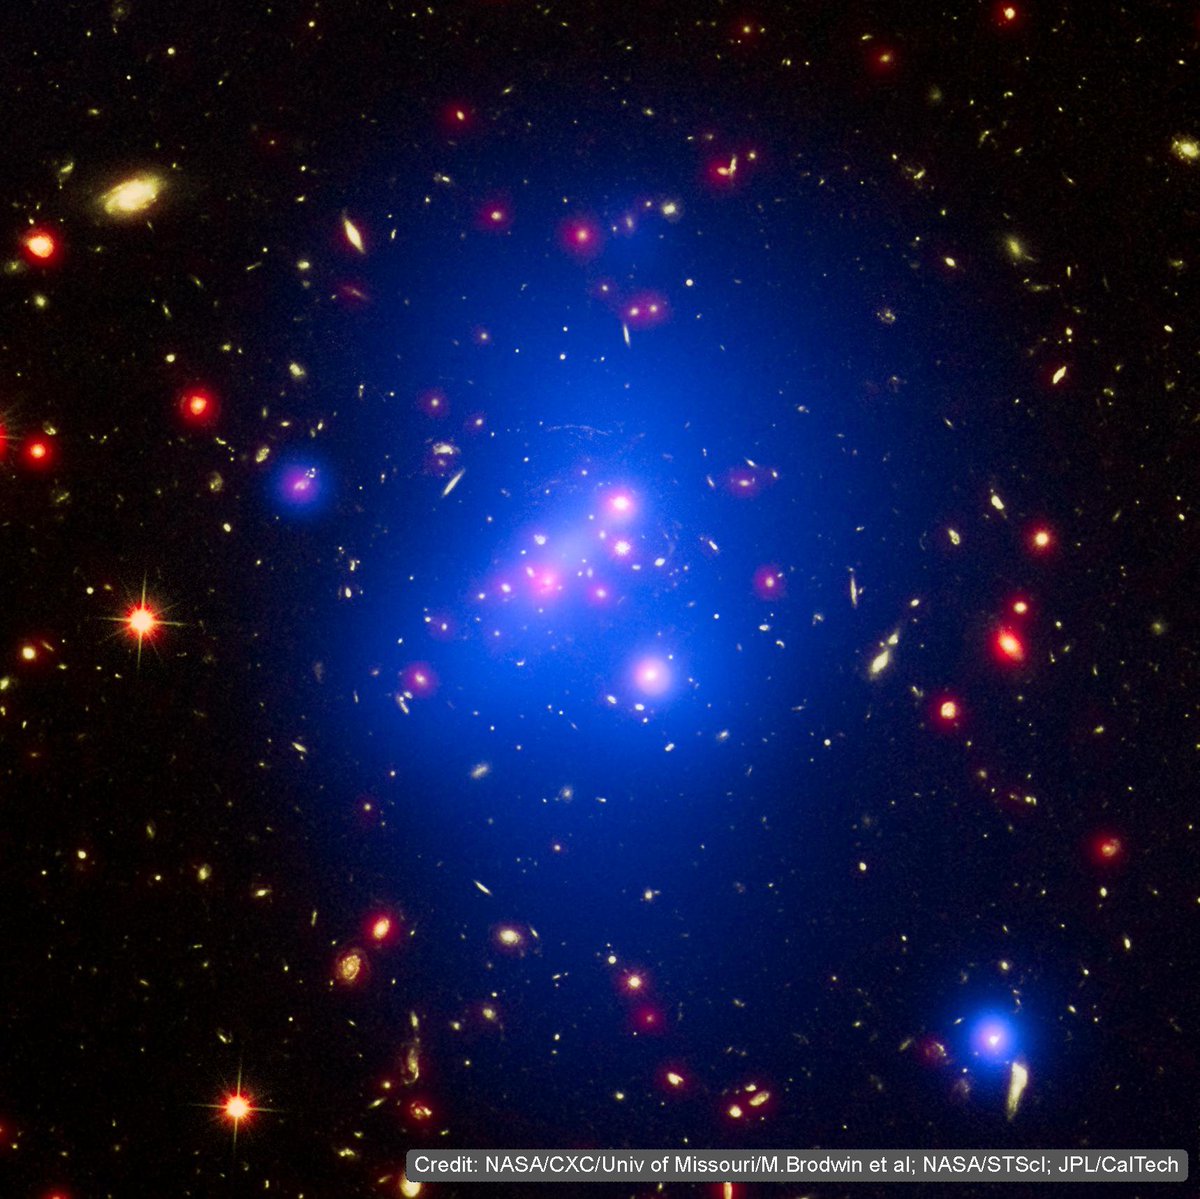 Galaxy cluster IDCS J1426 is so far away that the light detected is from when the universe was roughly a quarter of its current age. Studying it helps us understand how objects like these formed and evolved in the early universe. go.nasa.gov/43VEdPr #ColorWheelChallenge